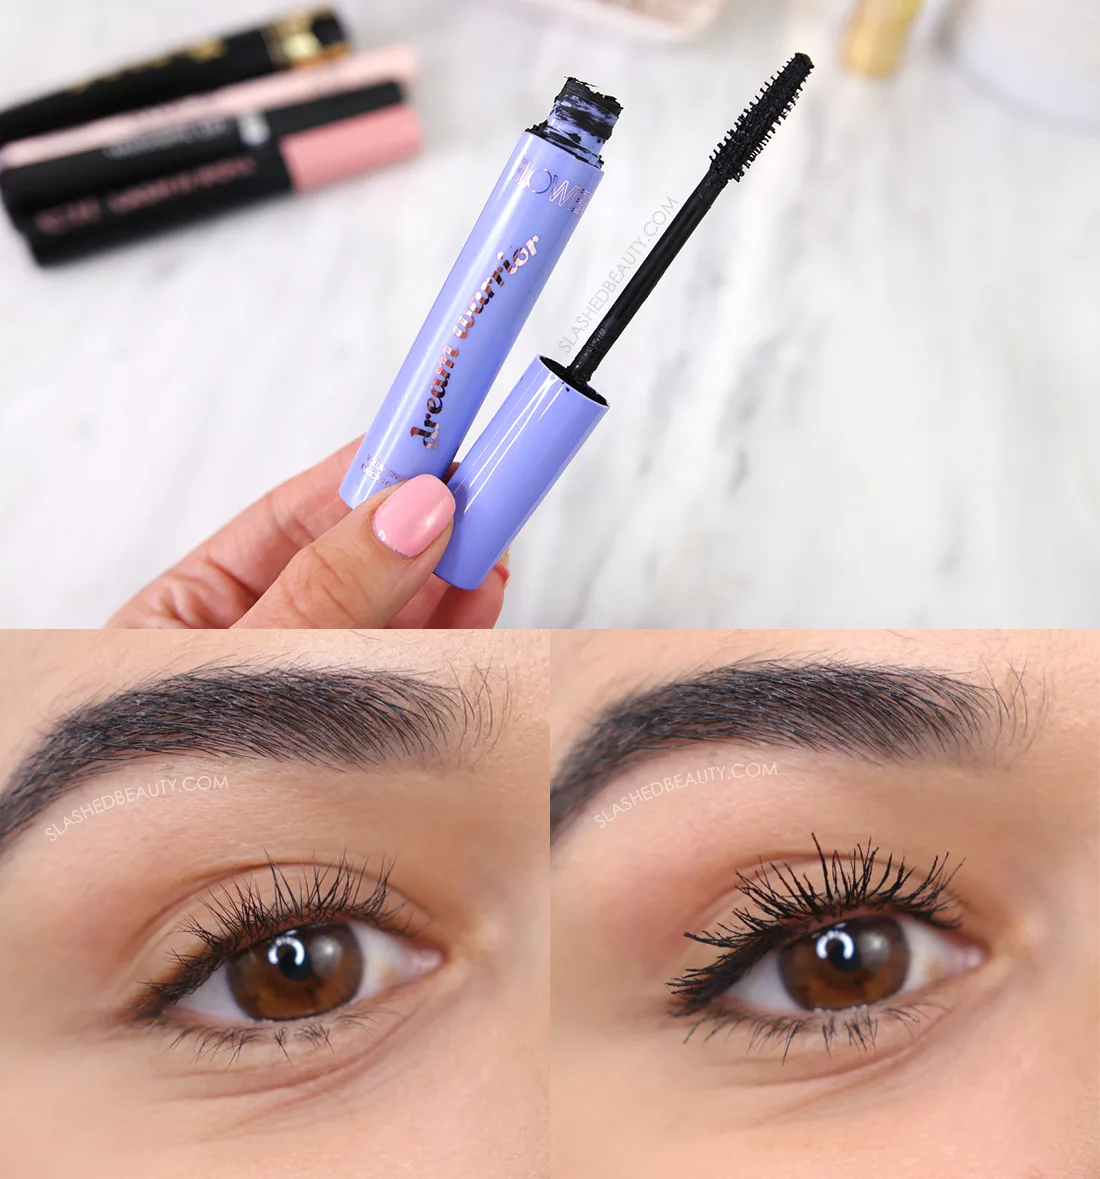 Open tube of Flower Beauty Dream Warrior Mascara with close up before & after | The 5 Best Drugstore Mascaras for Short Lashes in 2023 | Slashed Beauty